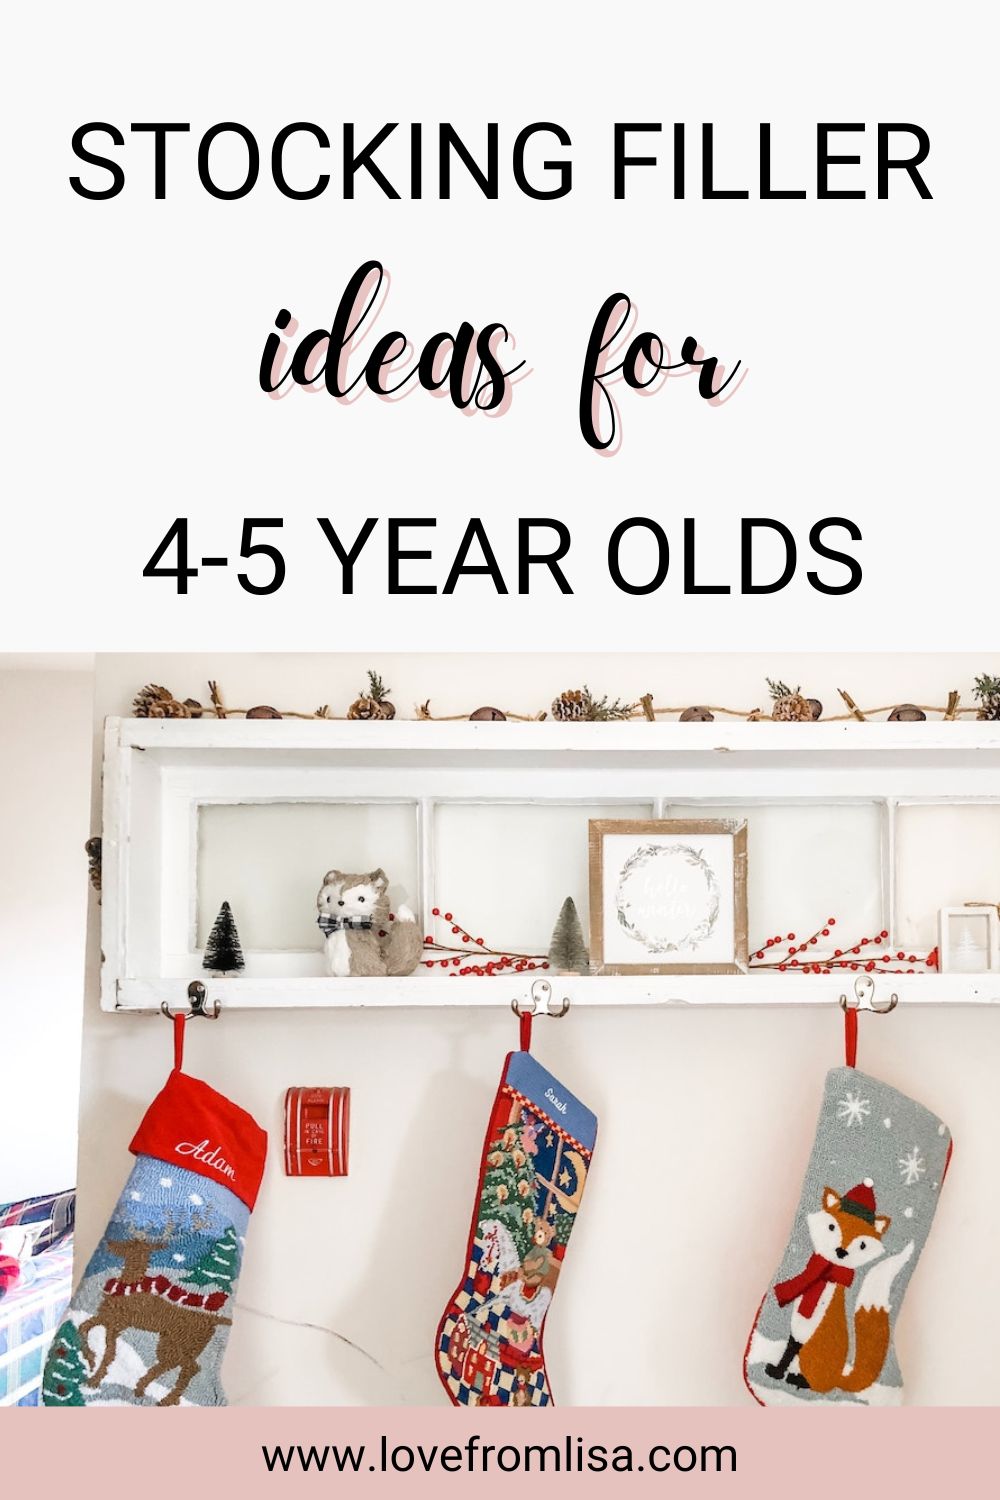 Stocking filler ideas for 4-5 year olds